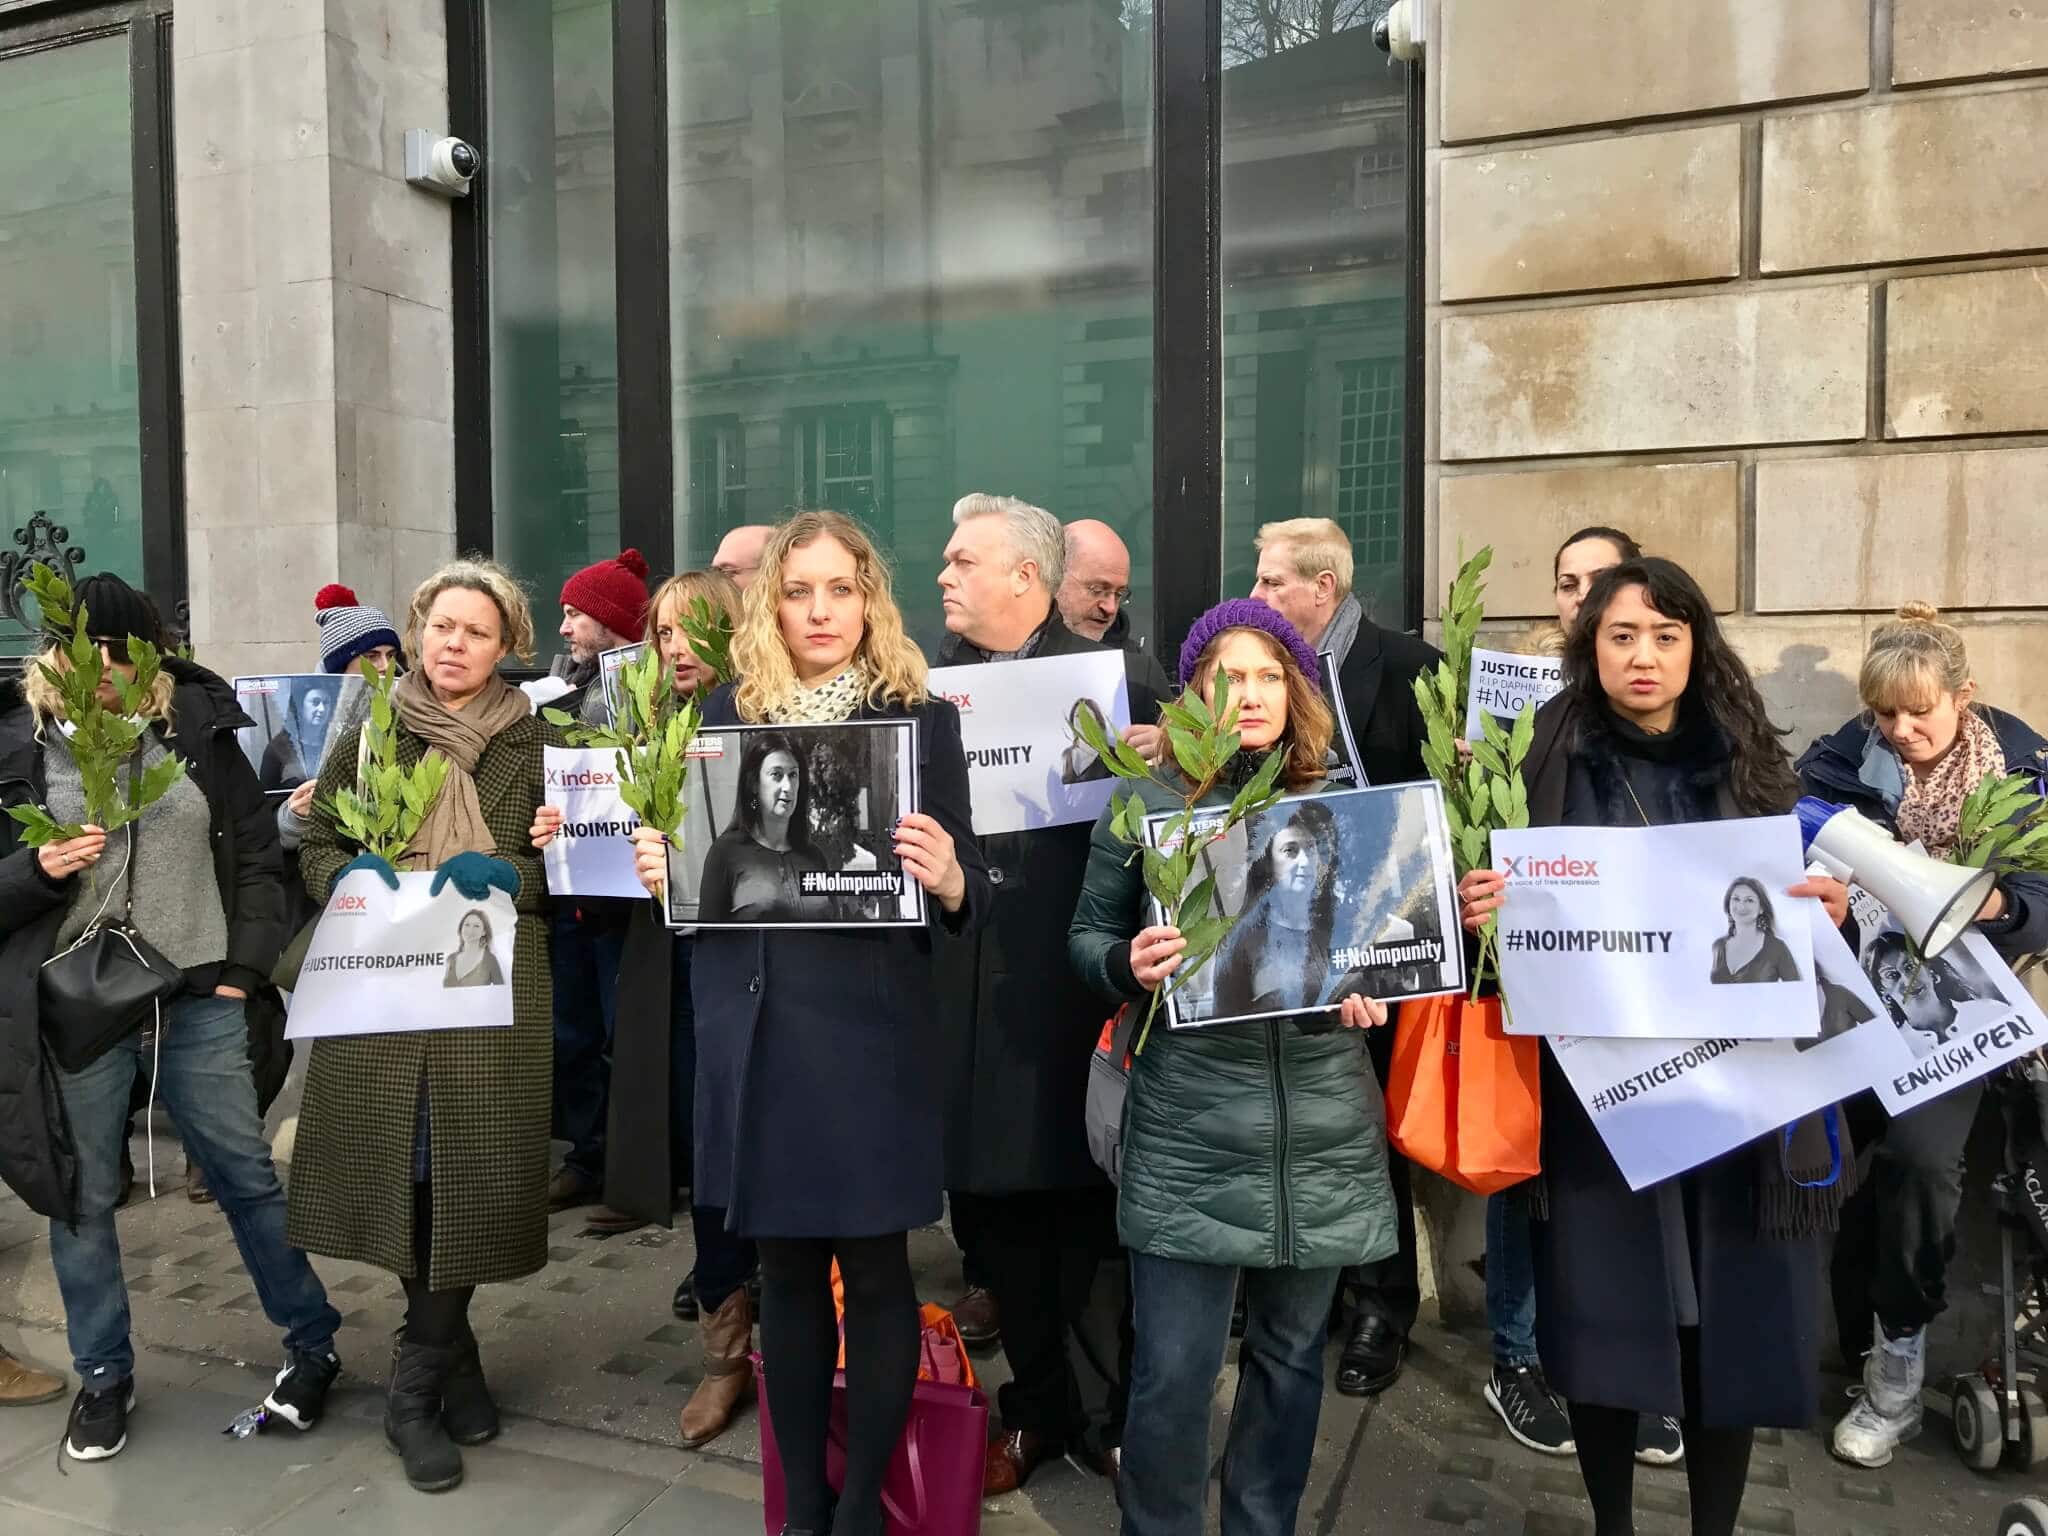 Malta: Free expression groups call for justice for Daphne Caruana Galizia - Protection